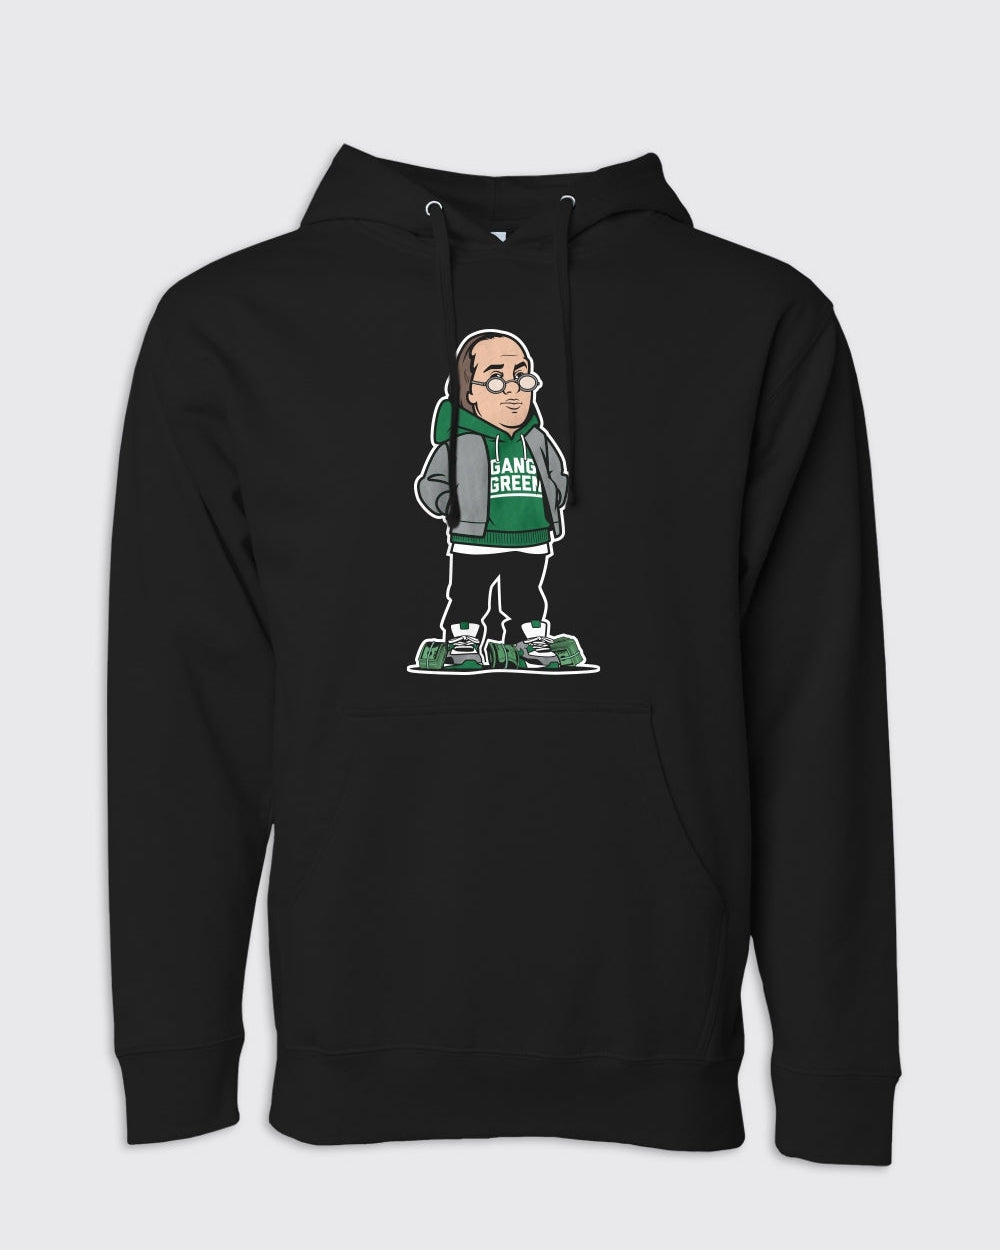 Ben Franklin Eagles Hoodie - Eagles, Hoodies - Philly Sports Shirts